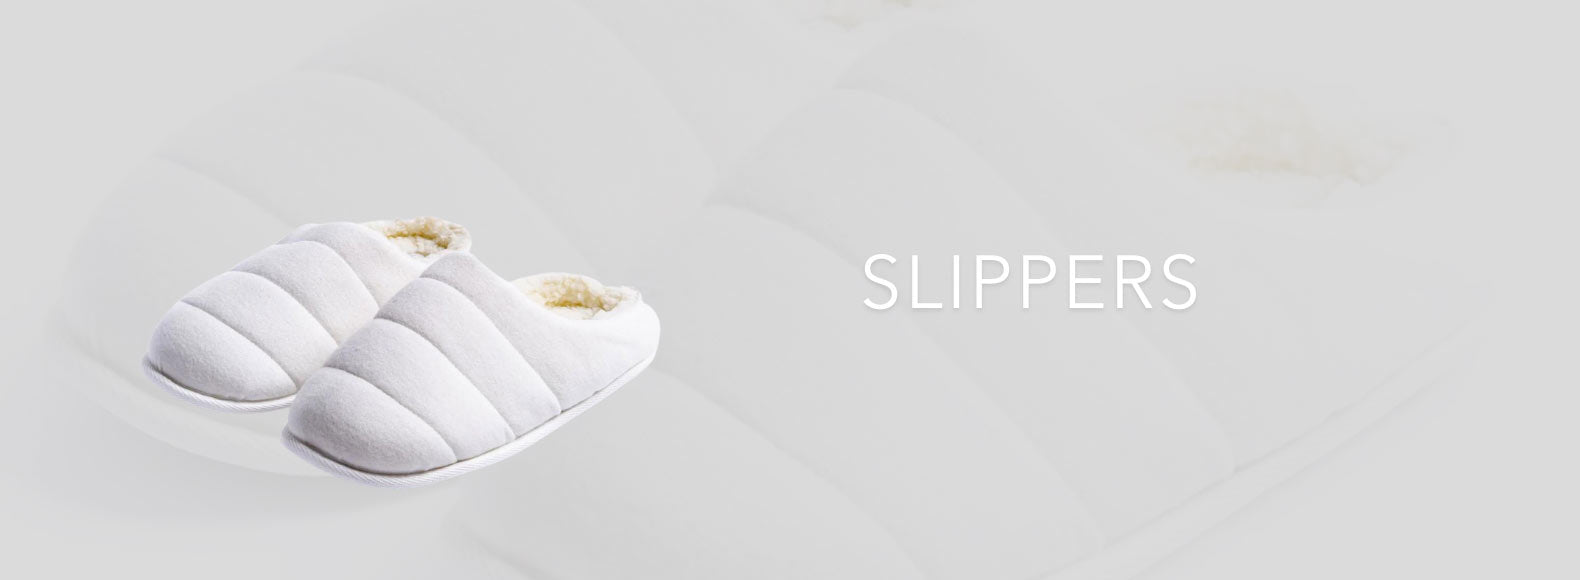 High-End Women's Slippers Sleepwear Collections